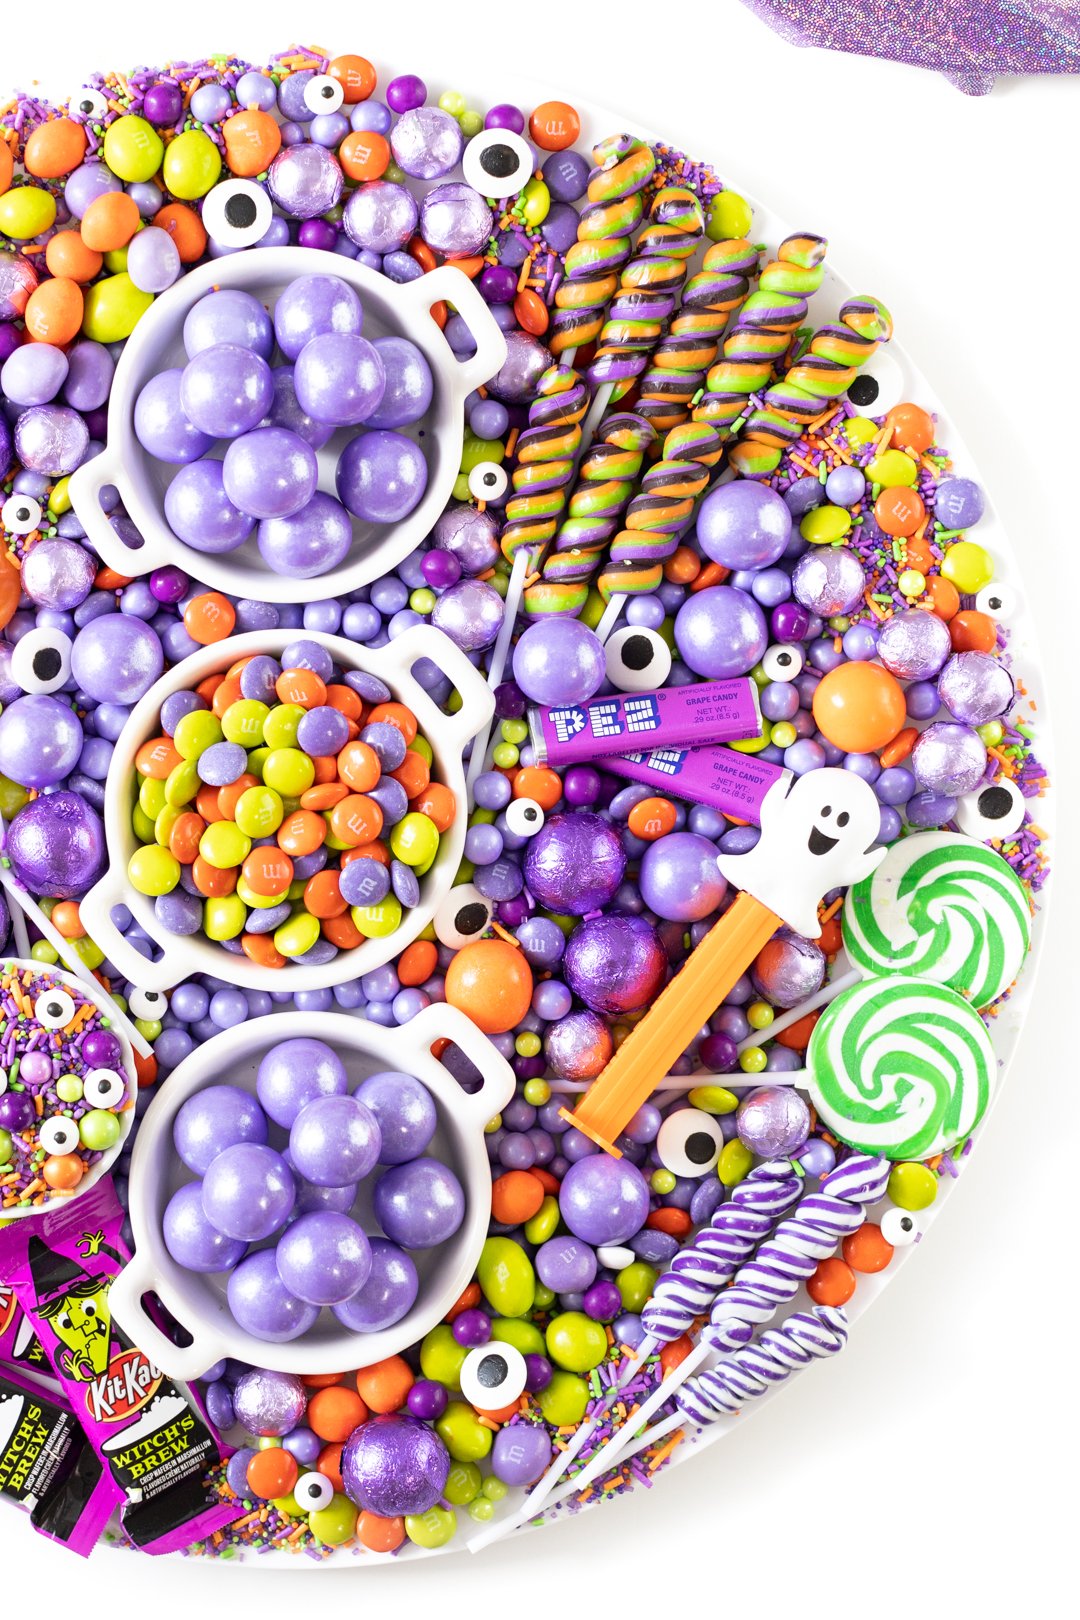 halloween grazing tray filled with candies. halloween m&ms, lollipops, ghost pez and more.